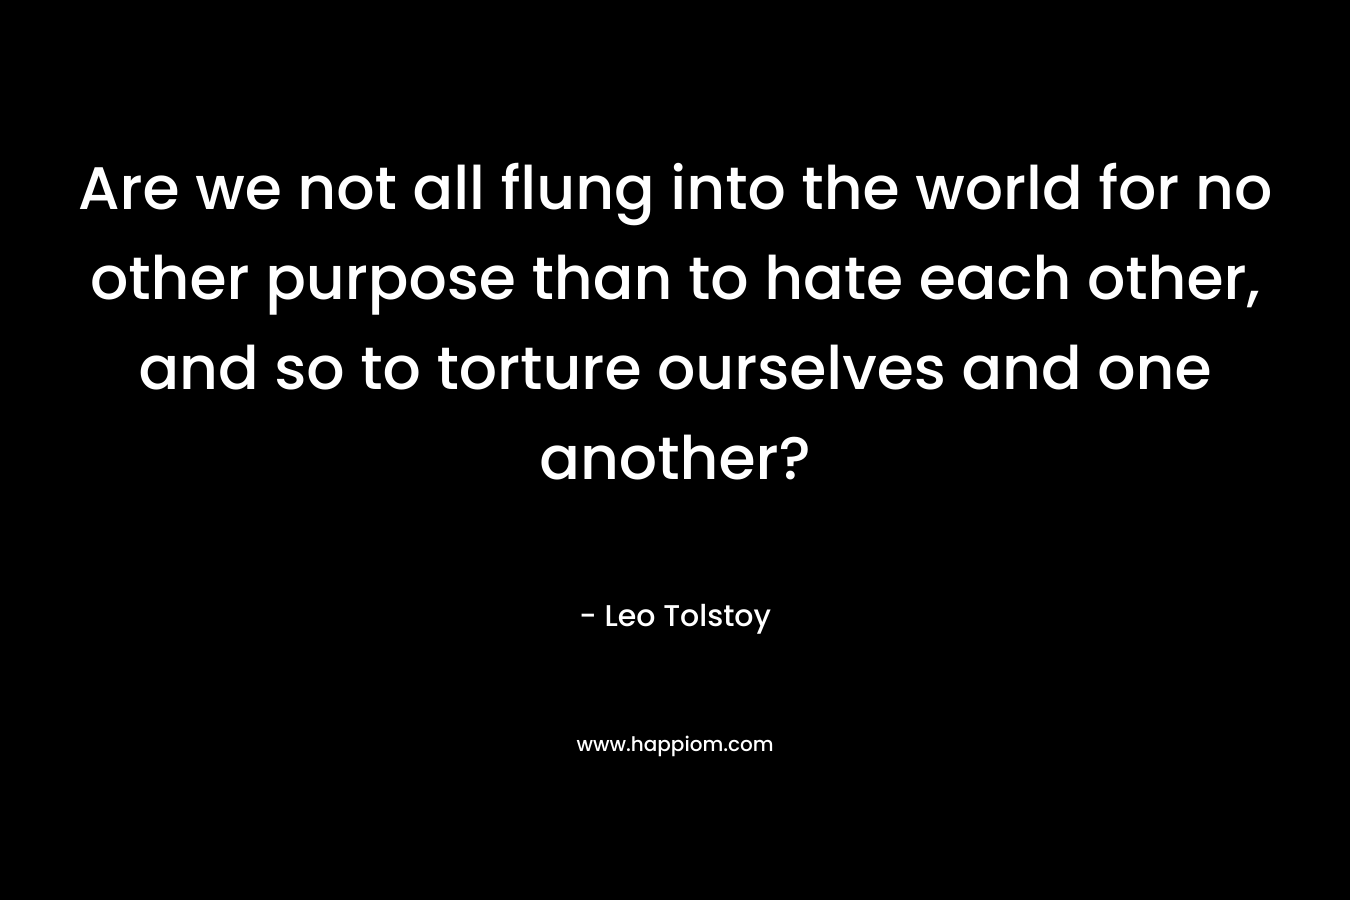 Are we not all flung into the world for no other purpose than to hate each other, and so to torture ourselves and one another?